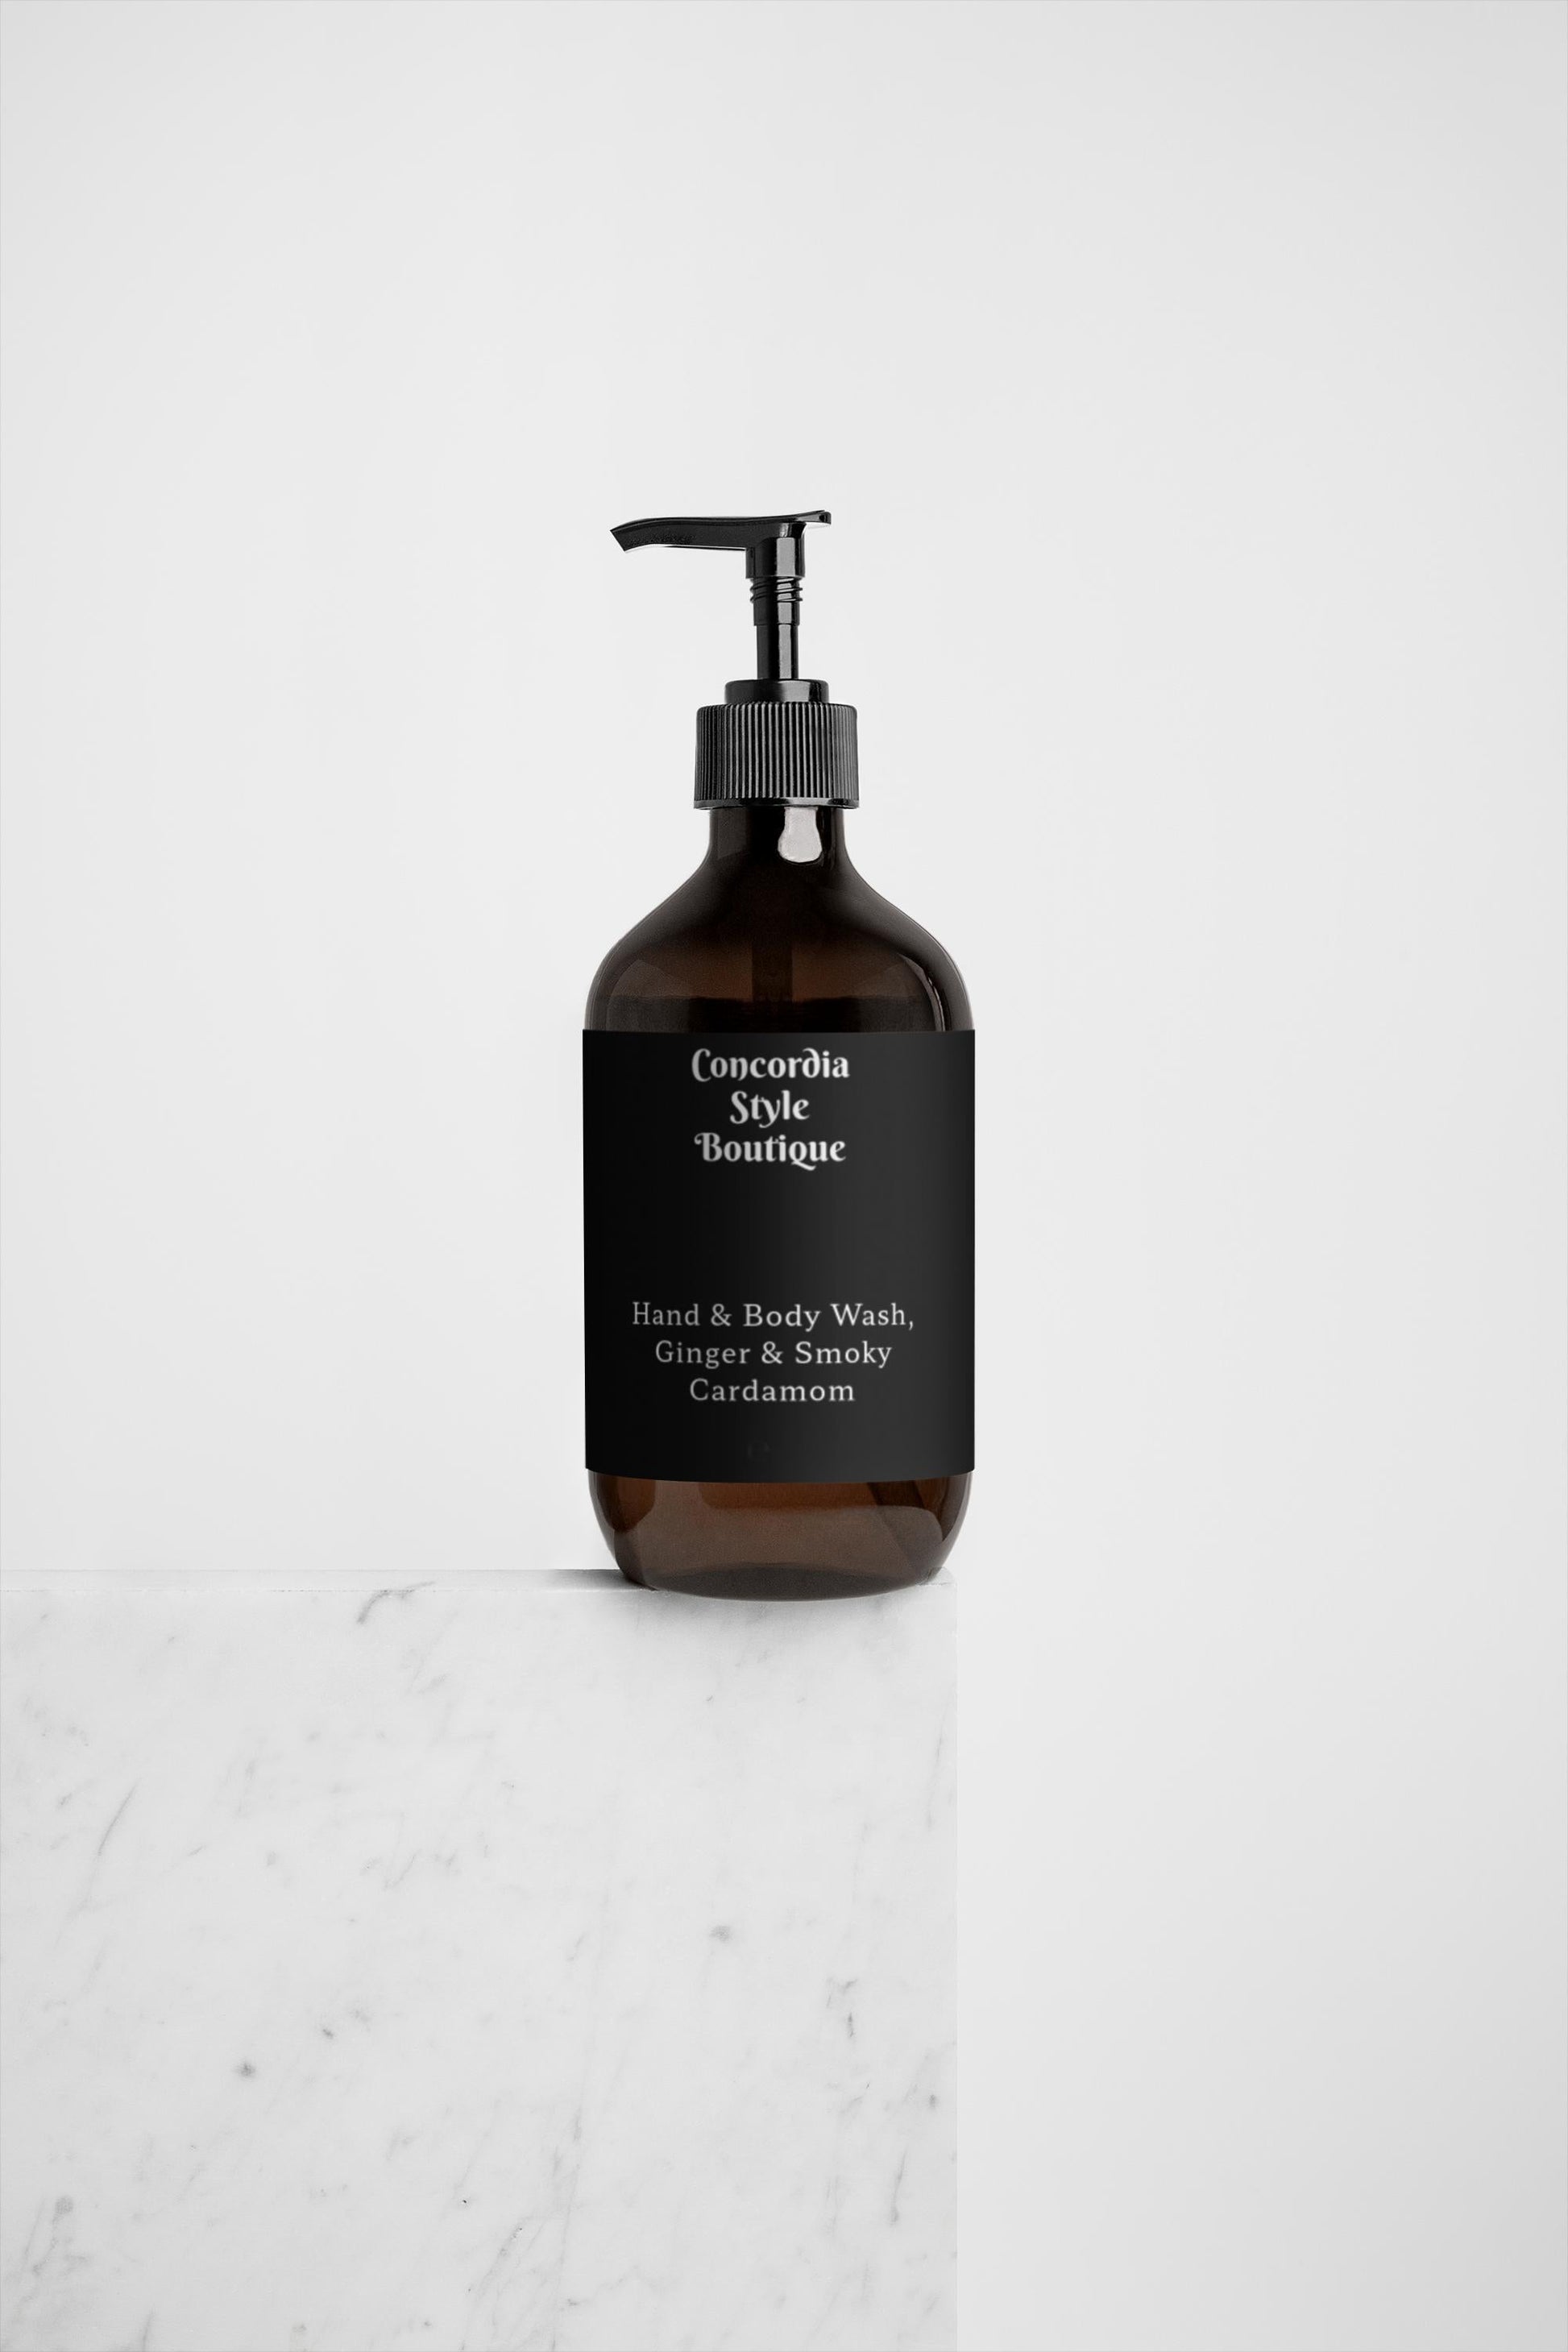 Hand & Body Wash, Ginger & Smoky Cardamom - Premium Hand & Body Wash, Ginger & Smoky Cardamom from Concordia Style Boutique - Just $18.50! Shop now at Concordia Style Boutique